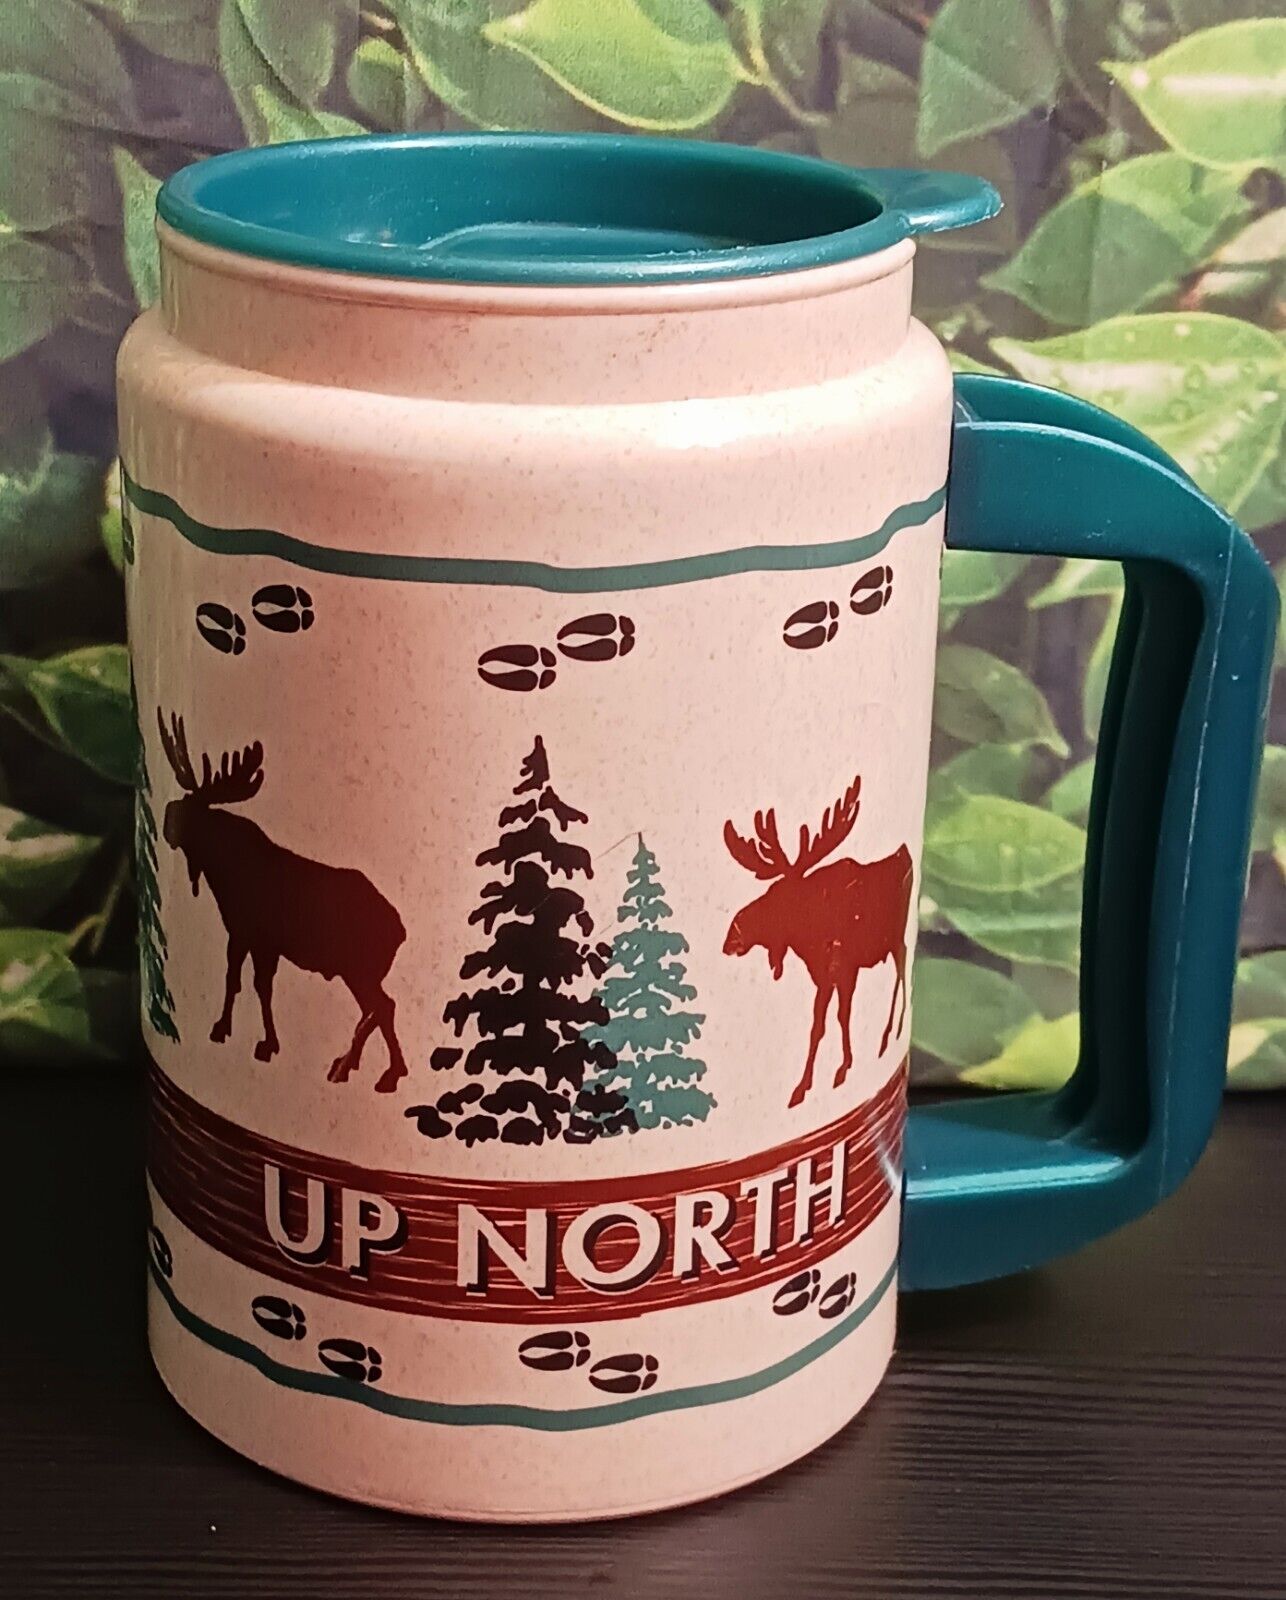 Vtg Whirley Travel Mug UP NORTH Moose Pine Trees Made In USA Hot Or Cold Cup